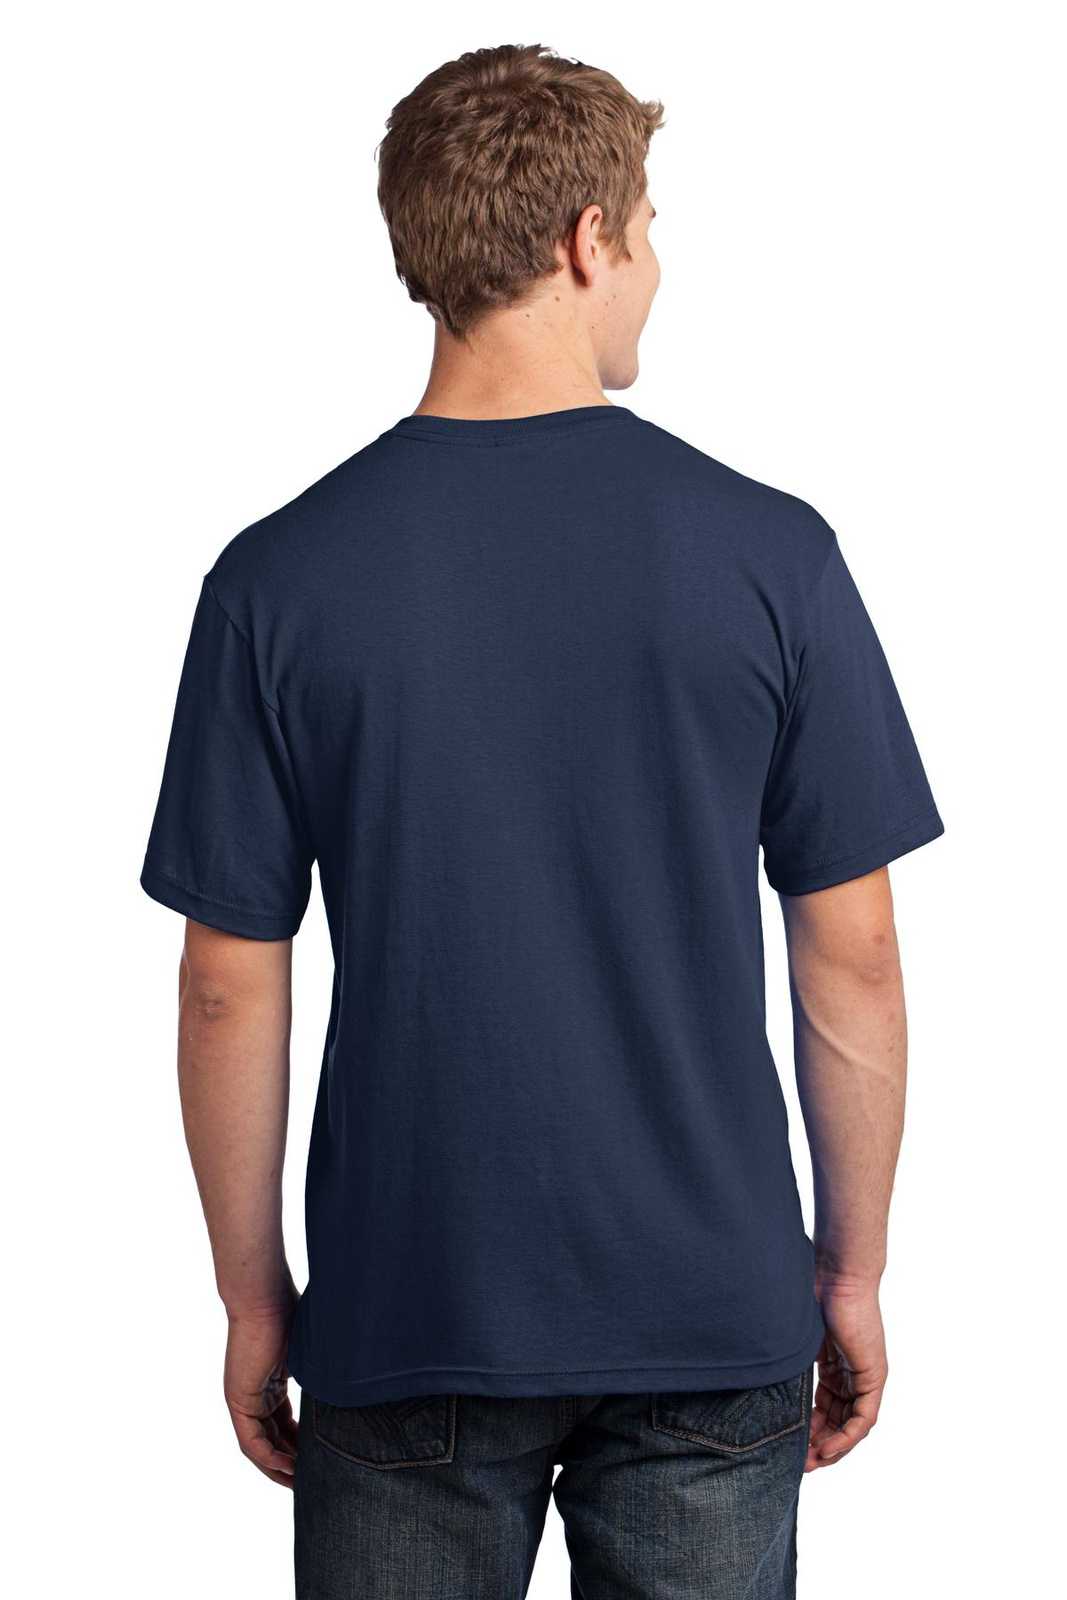 Port & Company USA100 All-American Tee - Navy - HIT a Double - 1